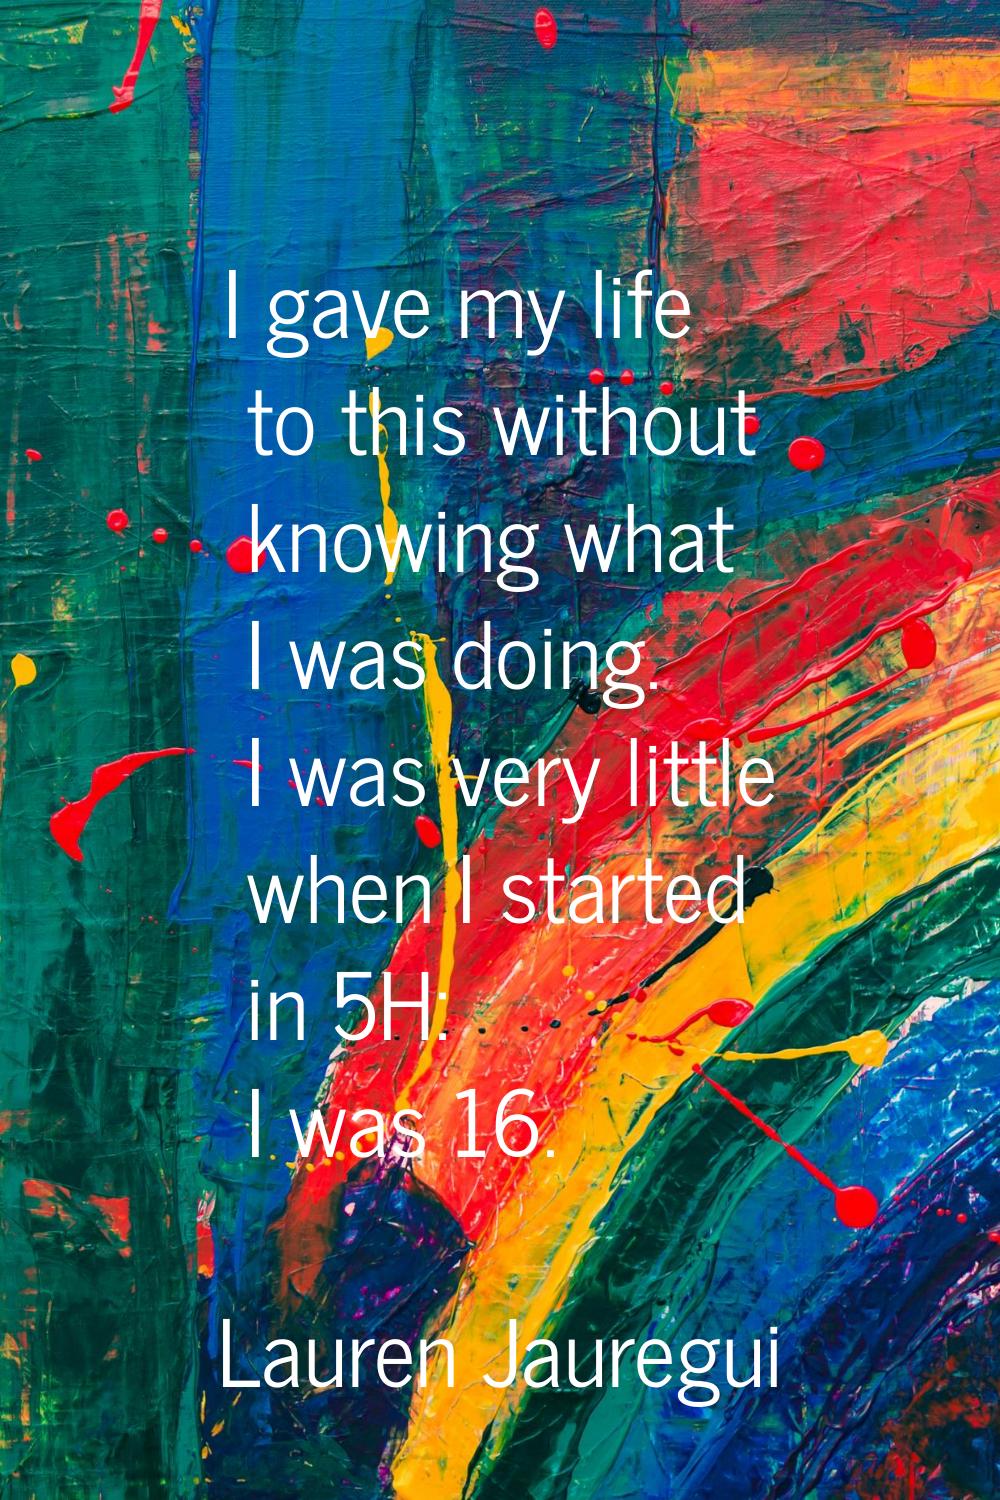 I gave my life to this without knowing what I was doing. I was very little when I started in 5H: I 